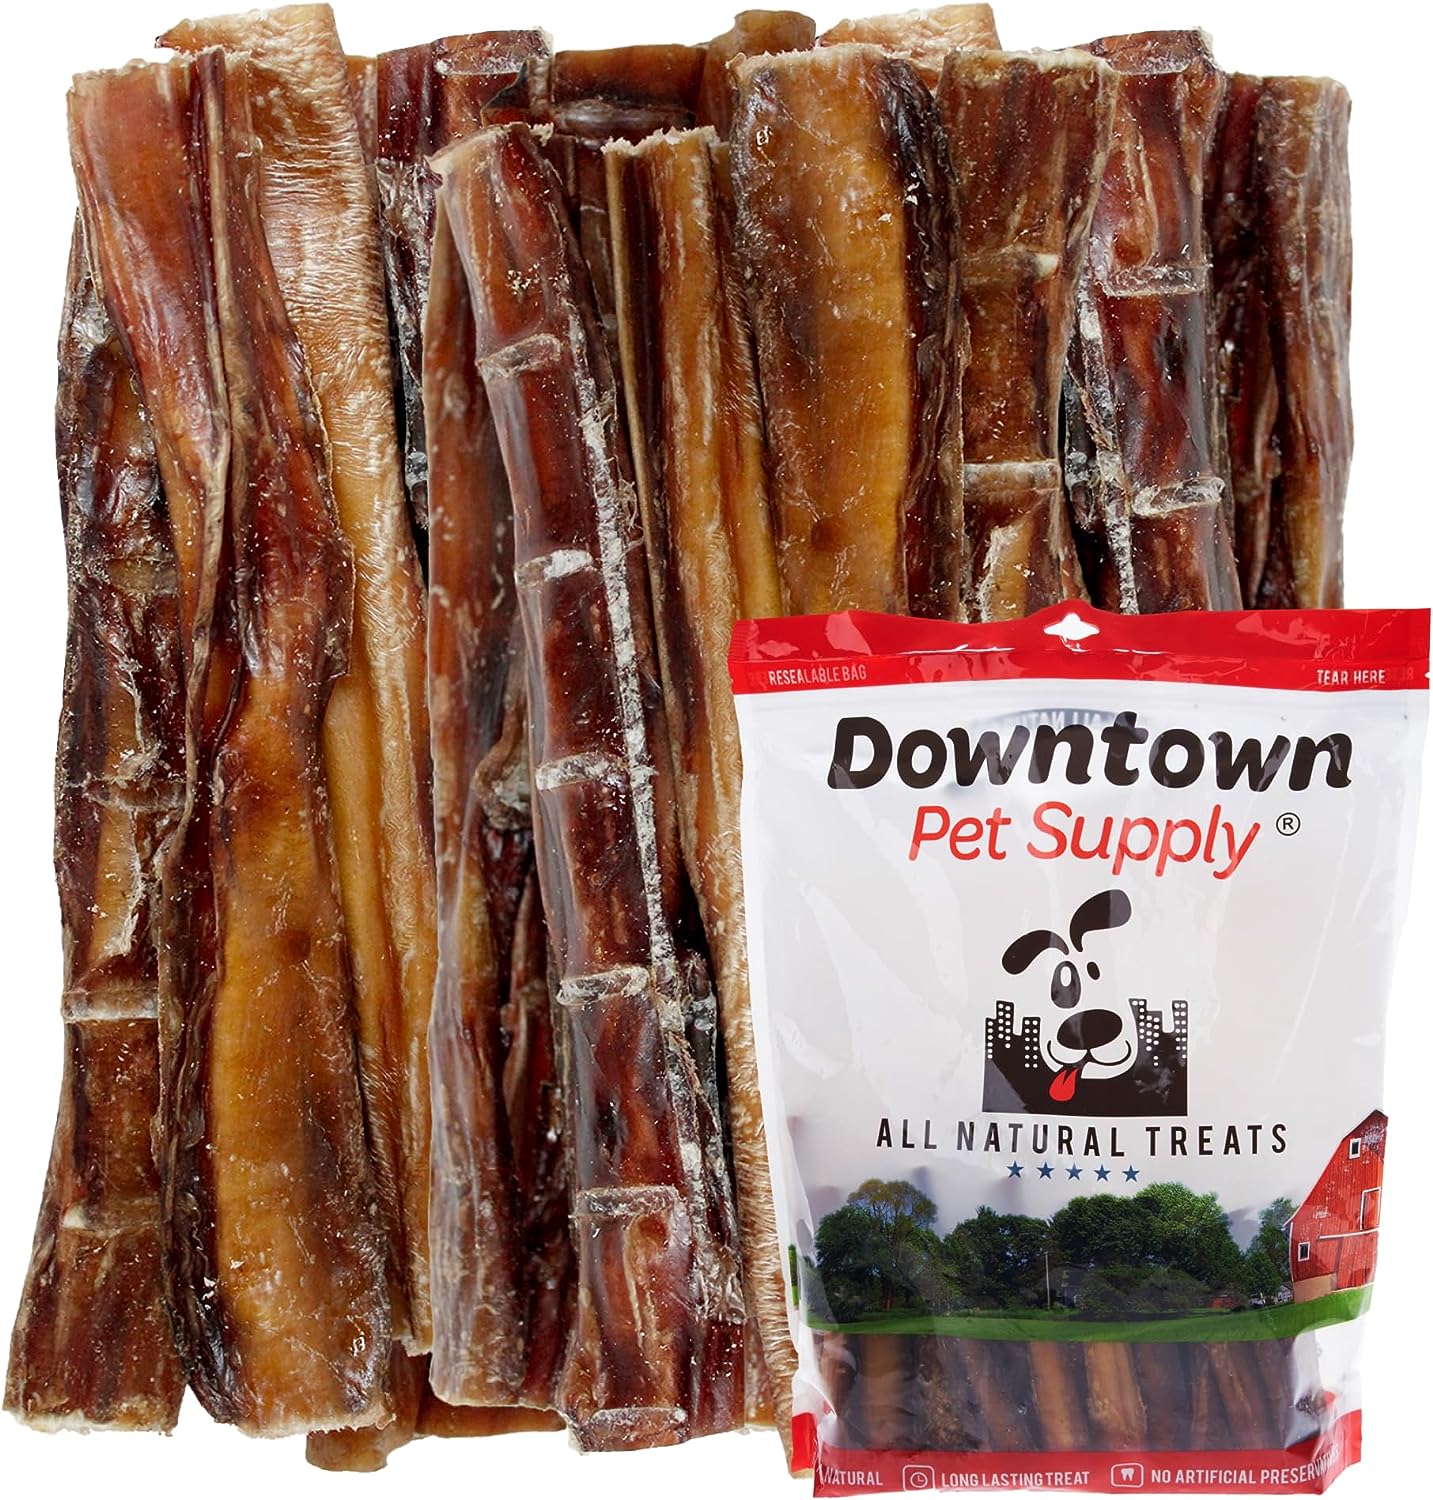 Downtown Pet Supply 6-inch Bully Sticks for Dogs, 3 LB - USA Sourced, No Hide Dog Chews Long Lasting and Non-Splintering - Nutrient-Rich, Single Ingredient and Odor Free Bully Sticks for Dogs